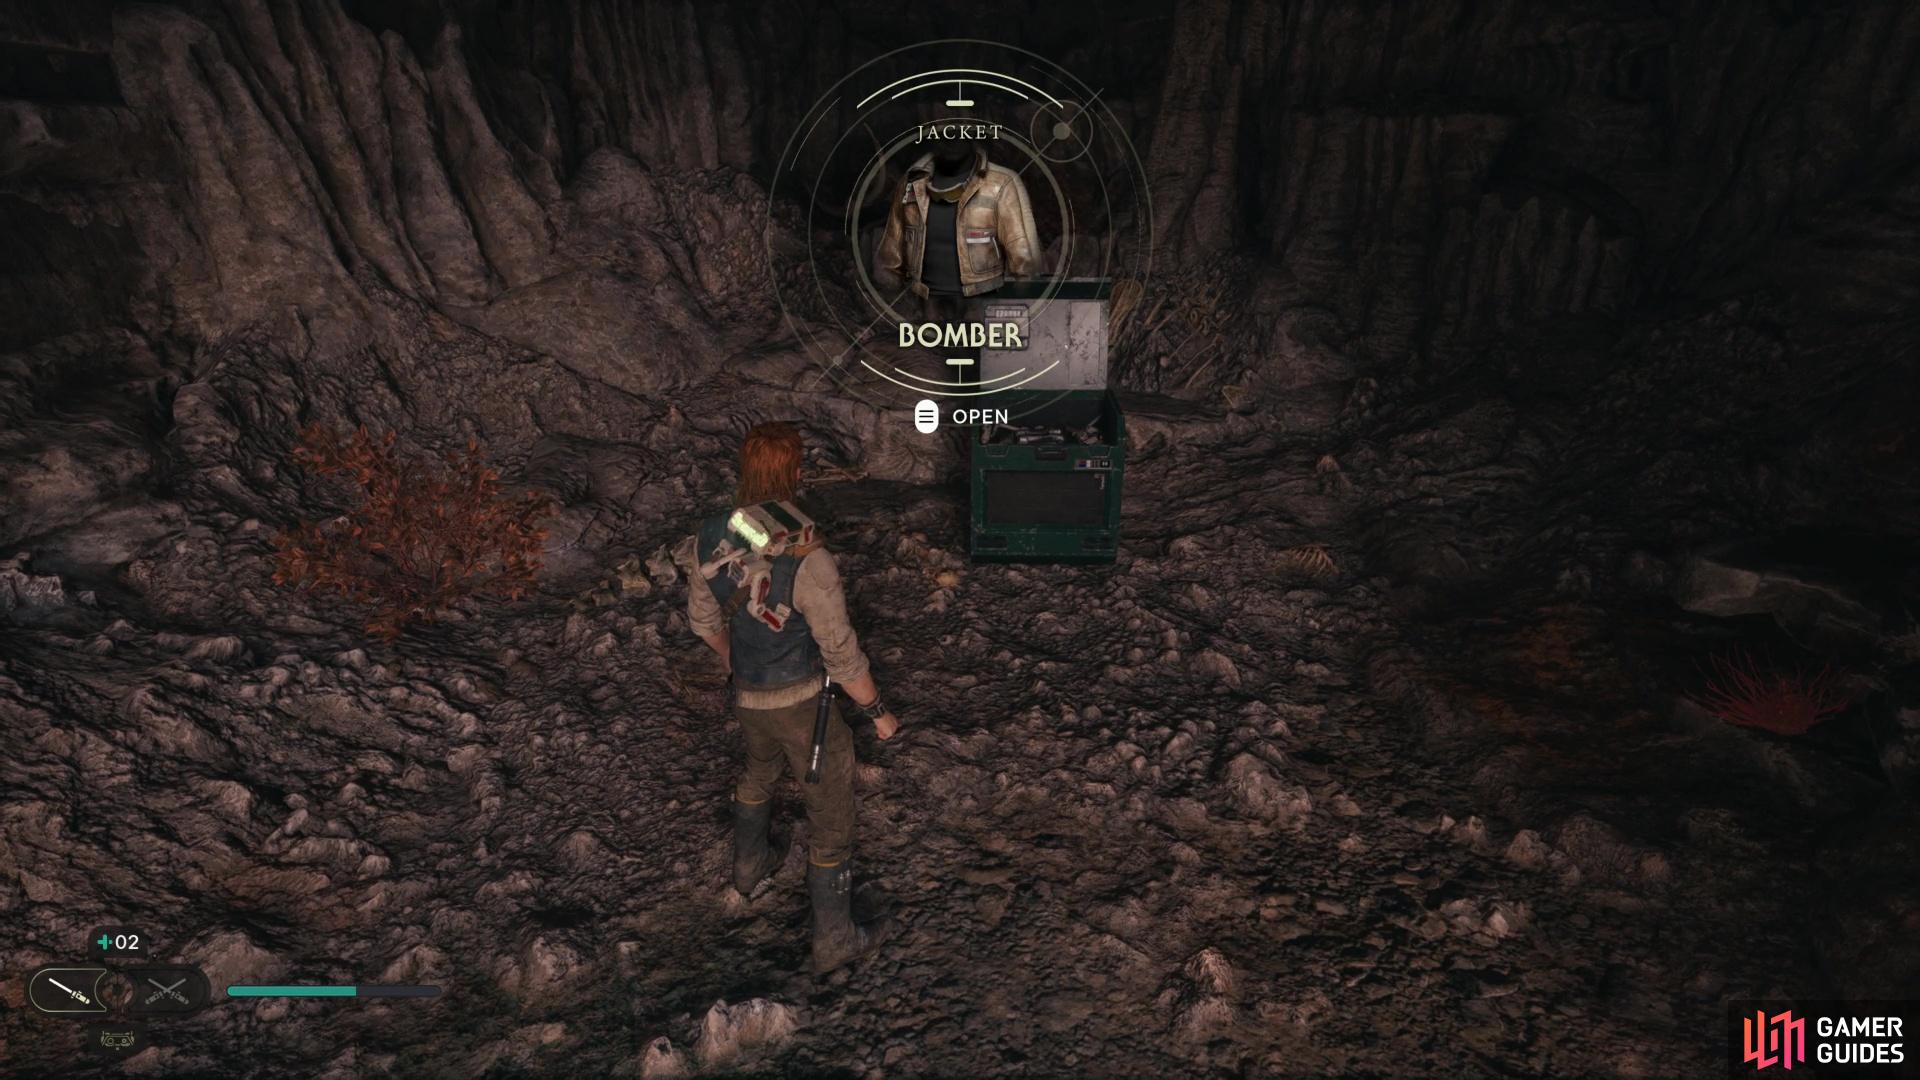 Defeat them and search a dry cubby to find a chest containing the Slicked Back hairstyle.